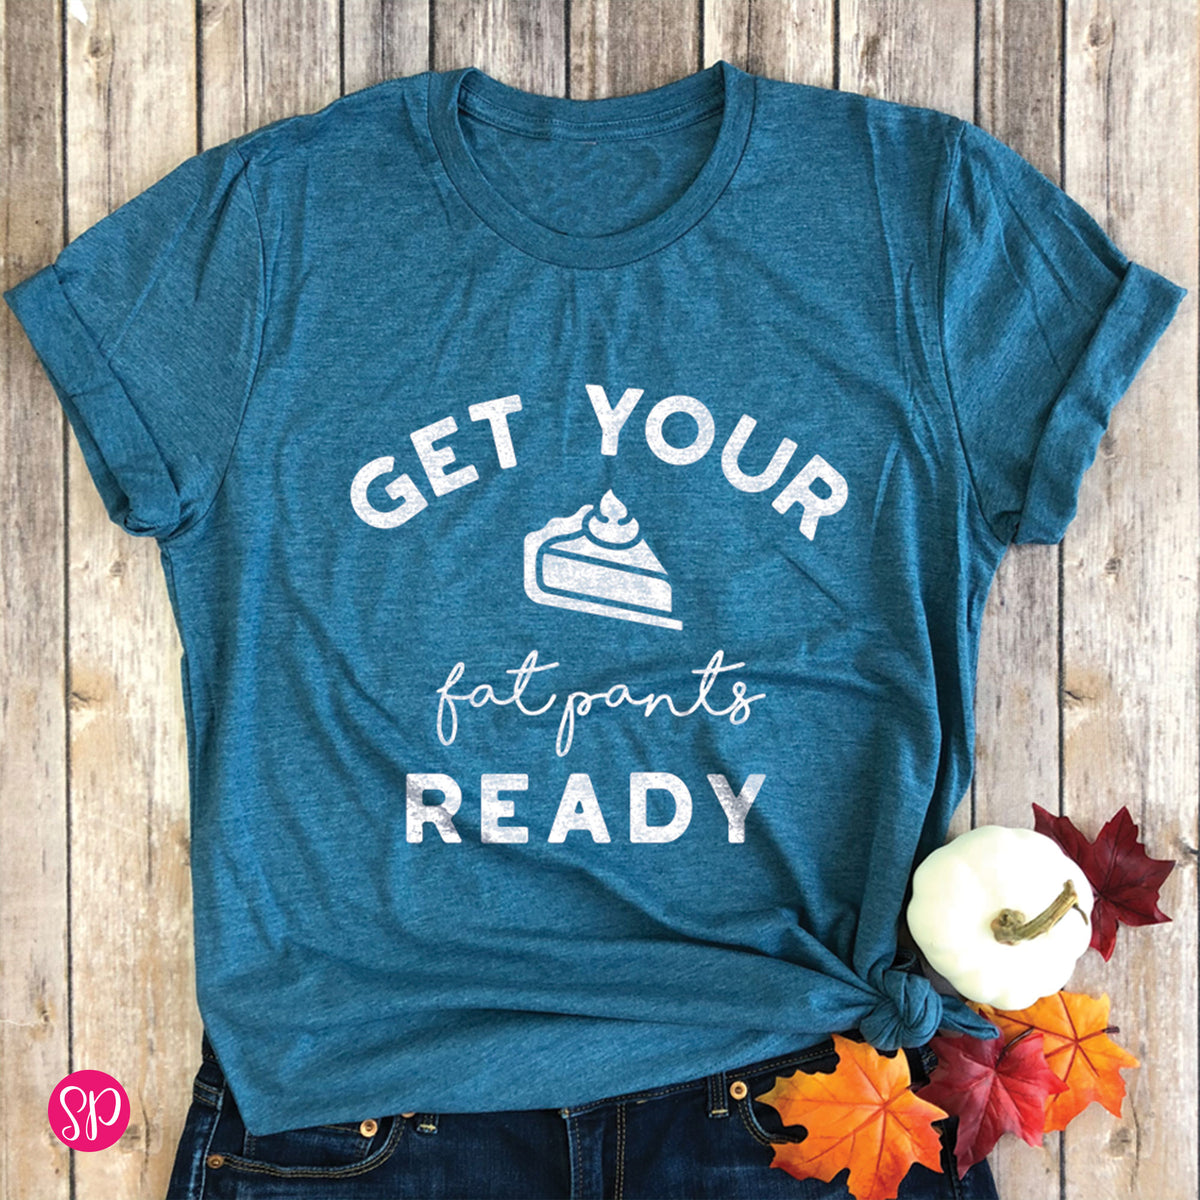 Get Your Fat Pants Ready Thanksgiving Day Pumpkin Pie Unisex Graphic Tee Shirt Funny Humor